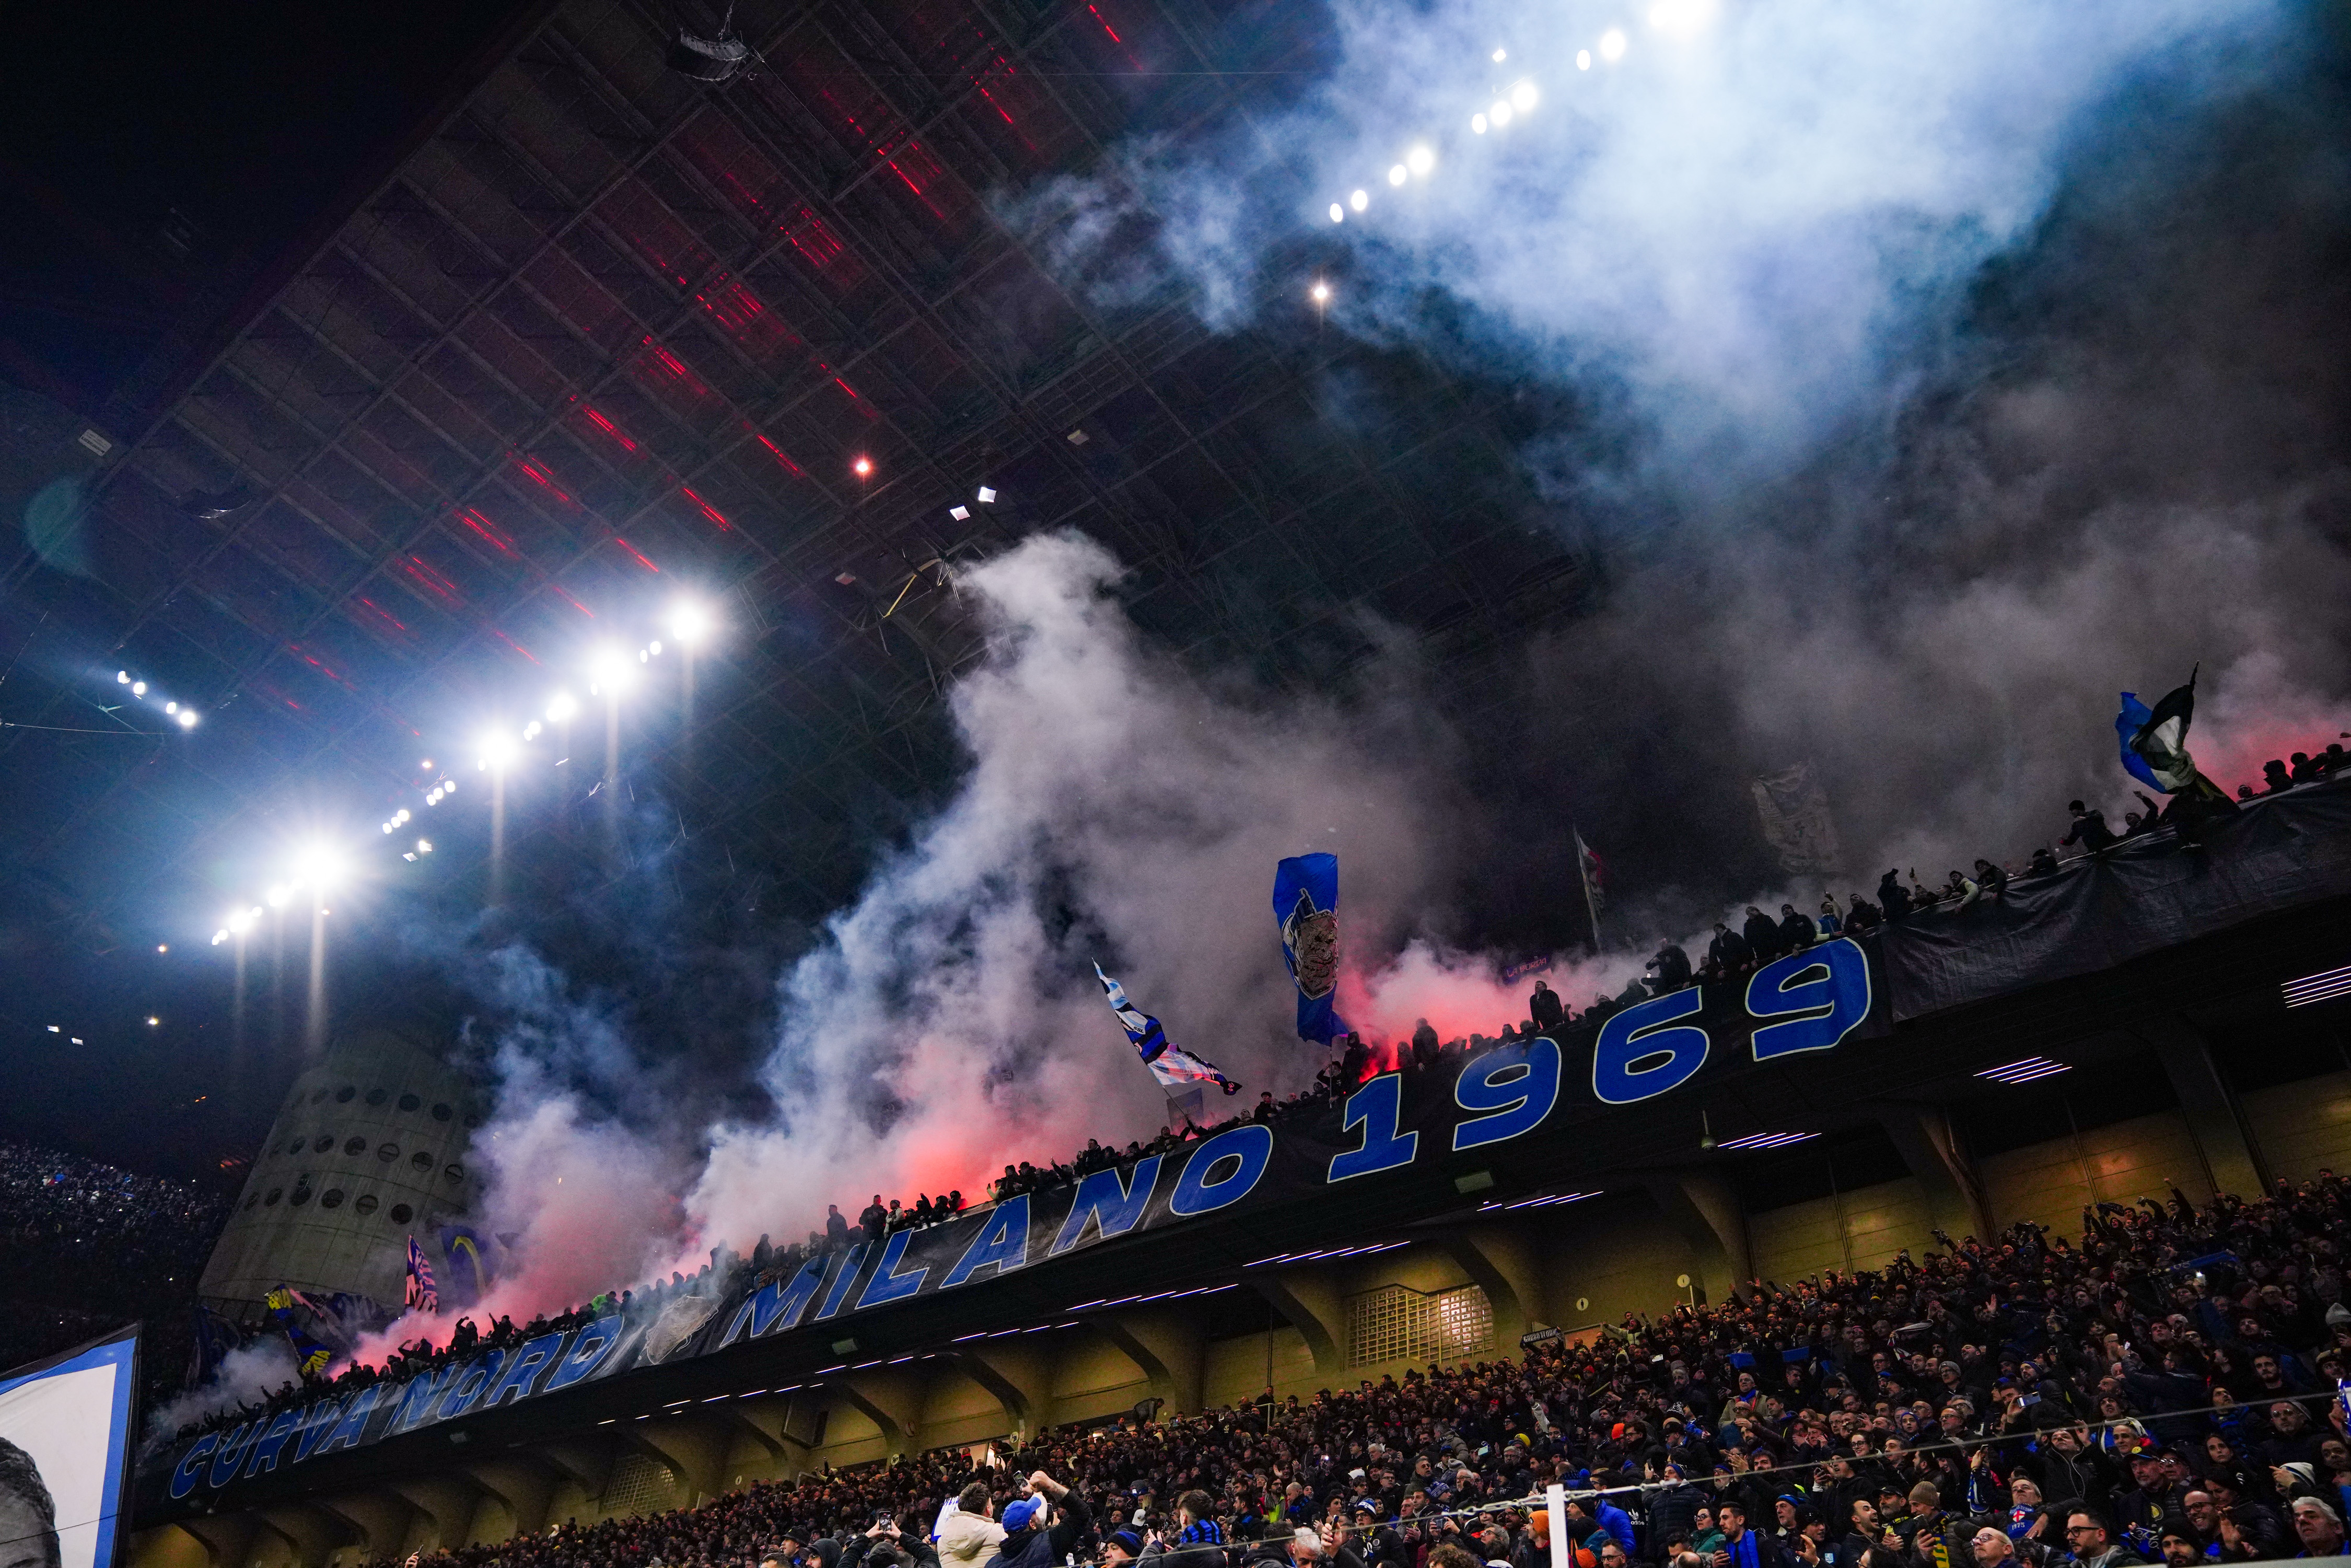 Inter ultras appeared on 'STARS' and 'CARNIVAL' on the album